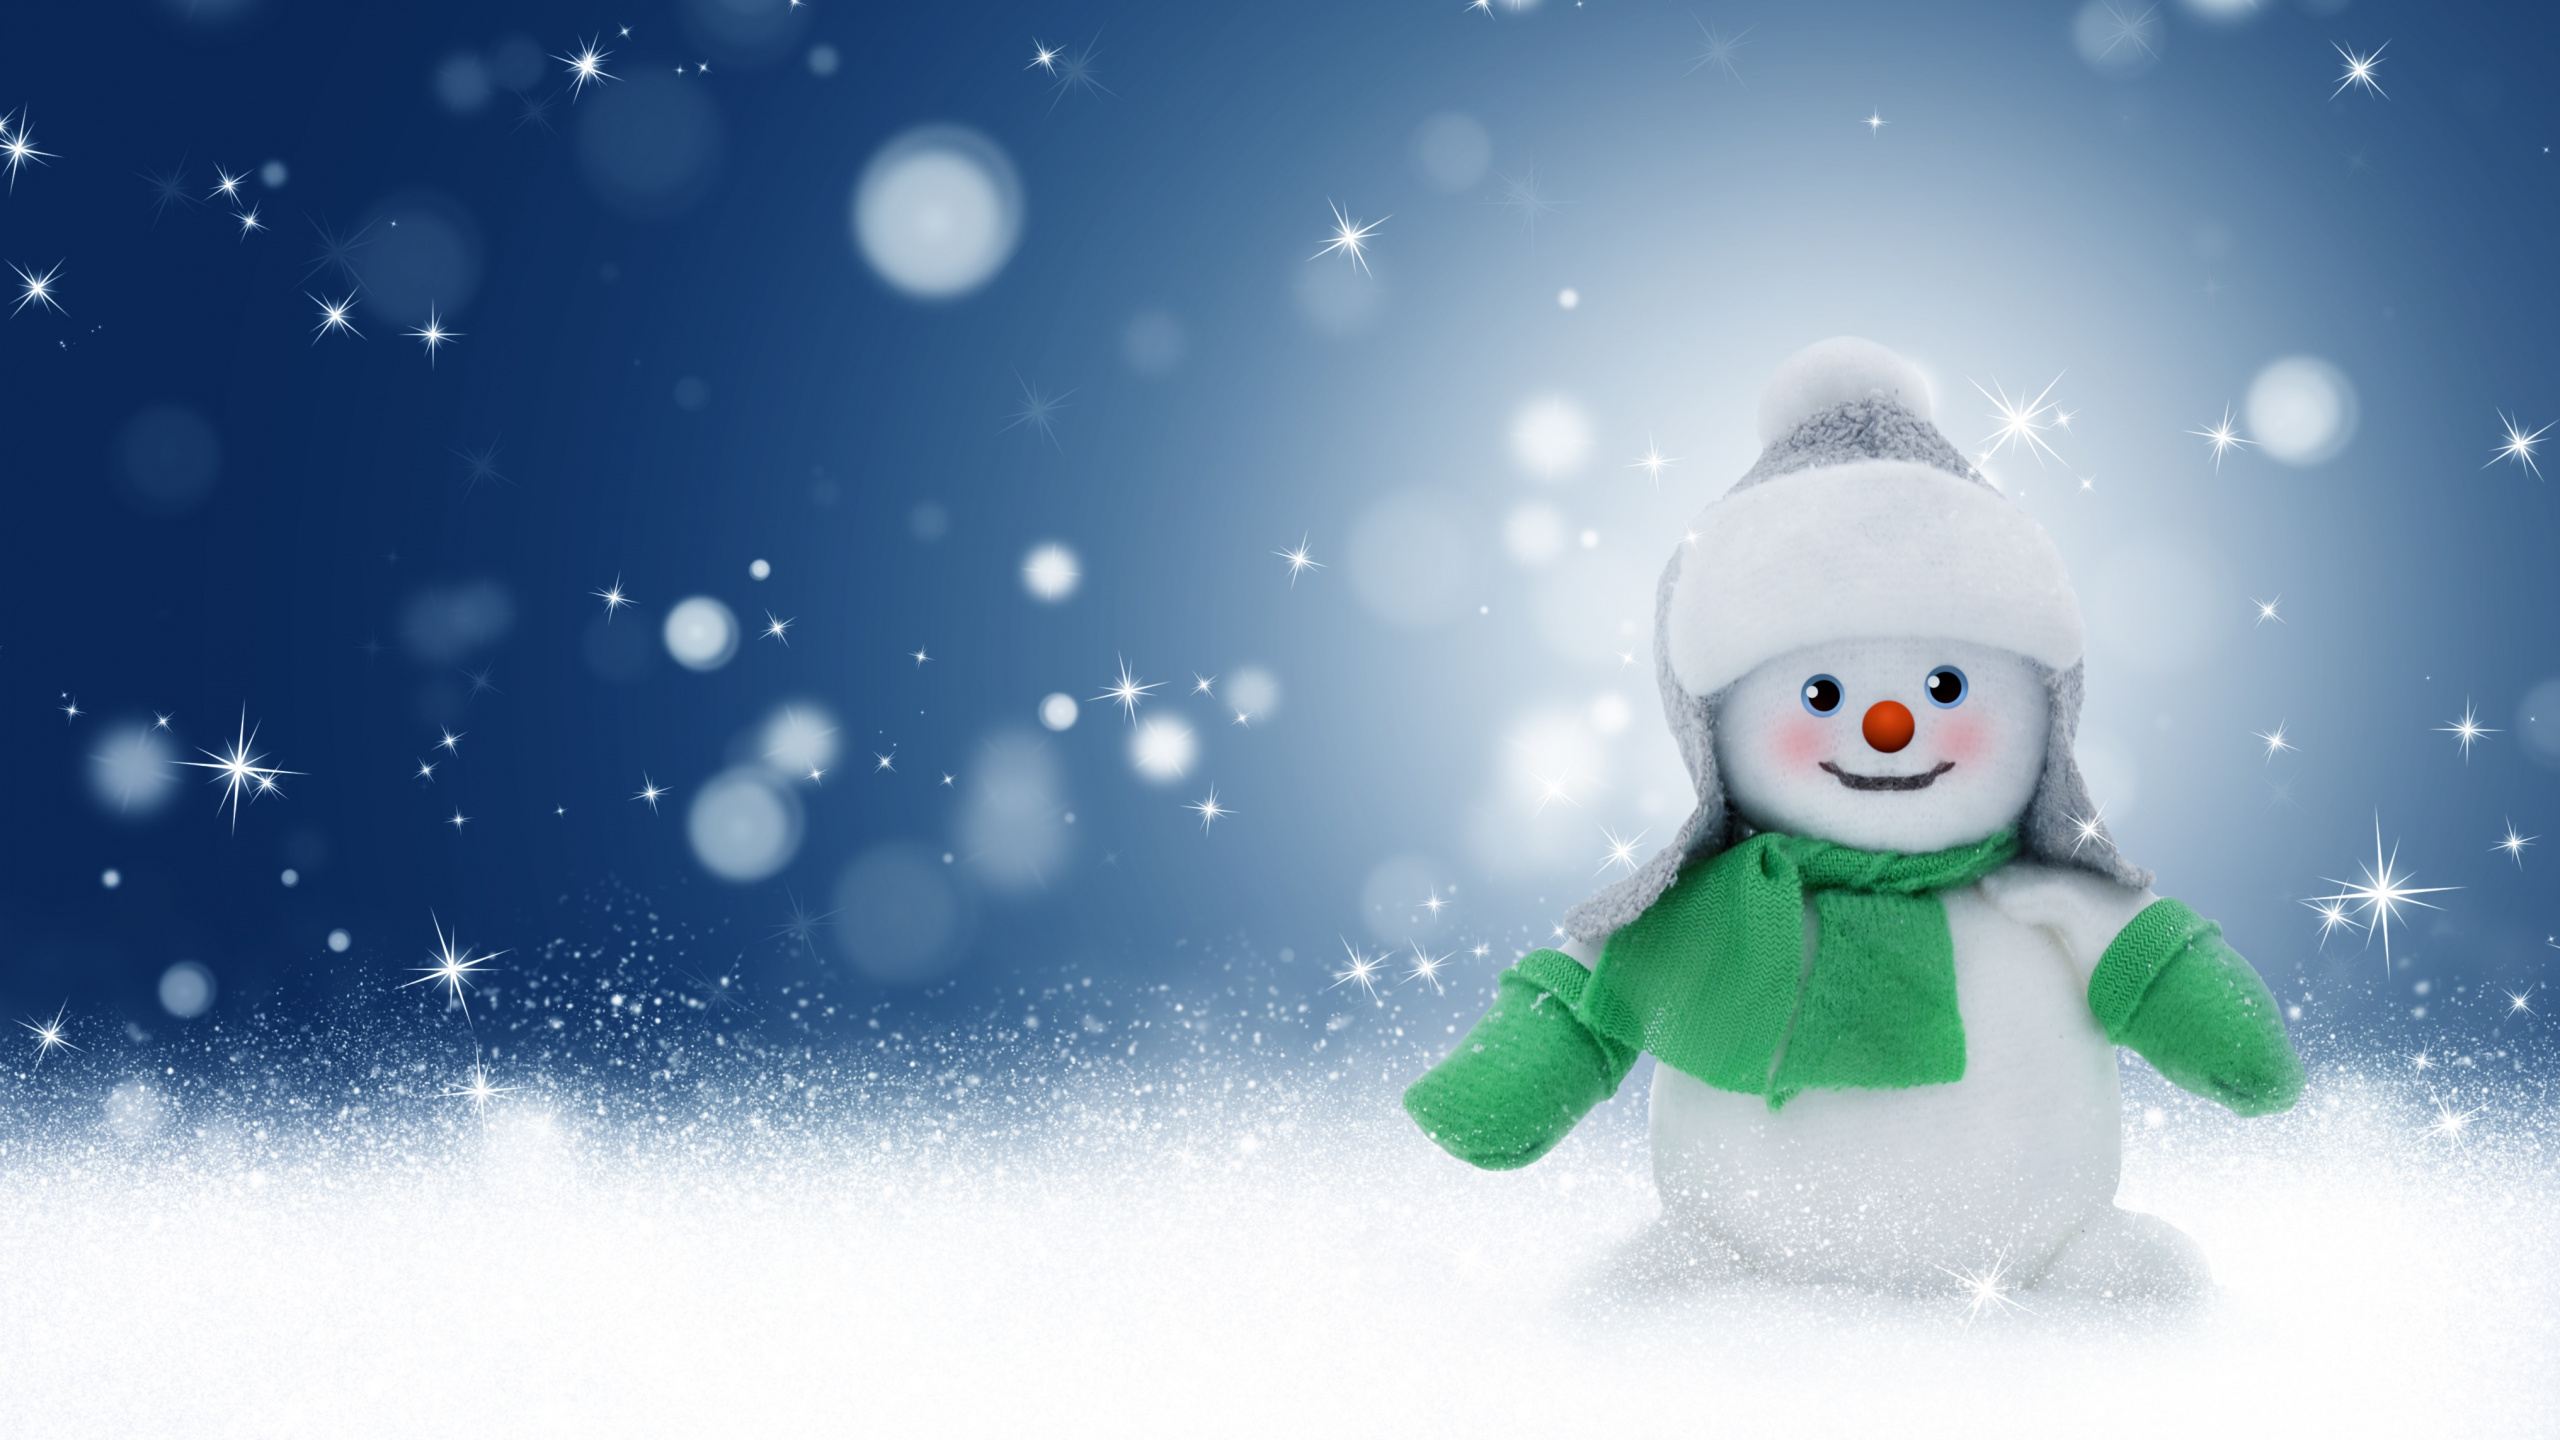 Christmas Day, Snow, Winter, Snowman, Playing in The Snow. Wallpaper in 2560x1440 Resolution